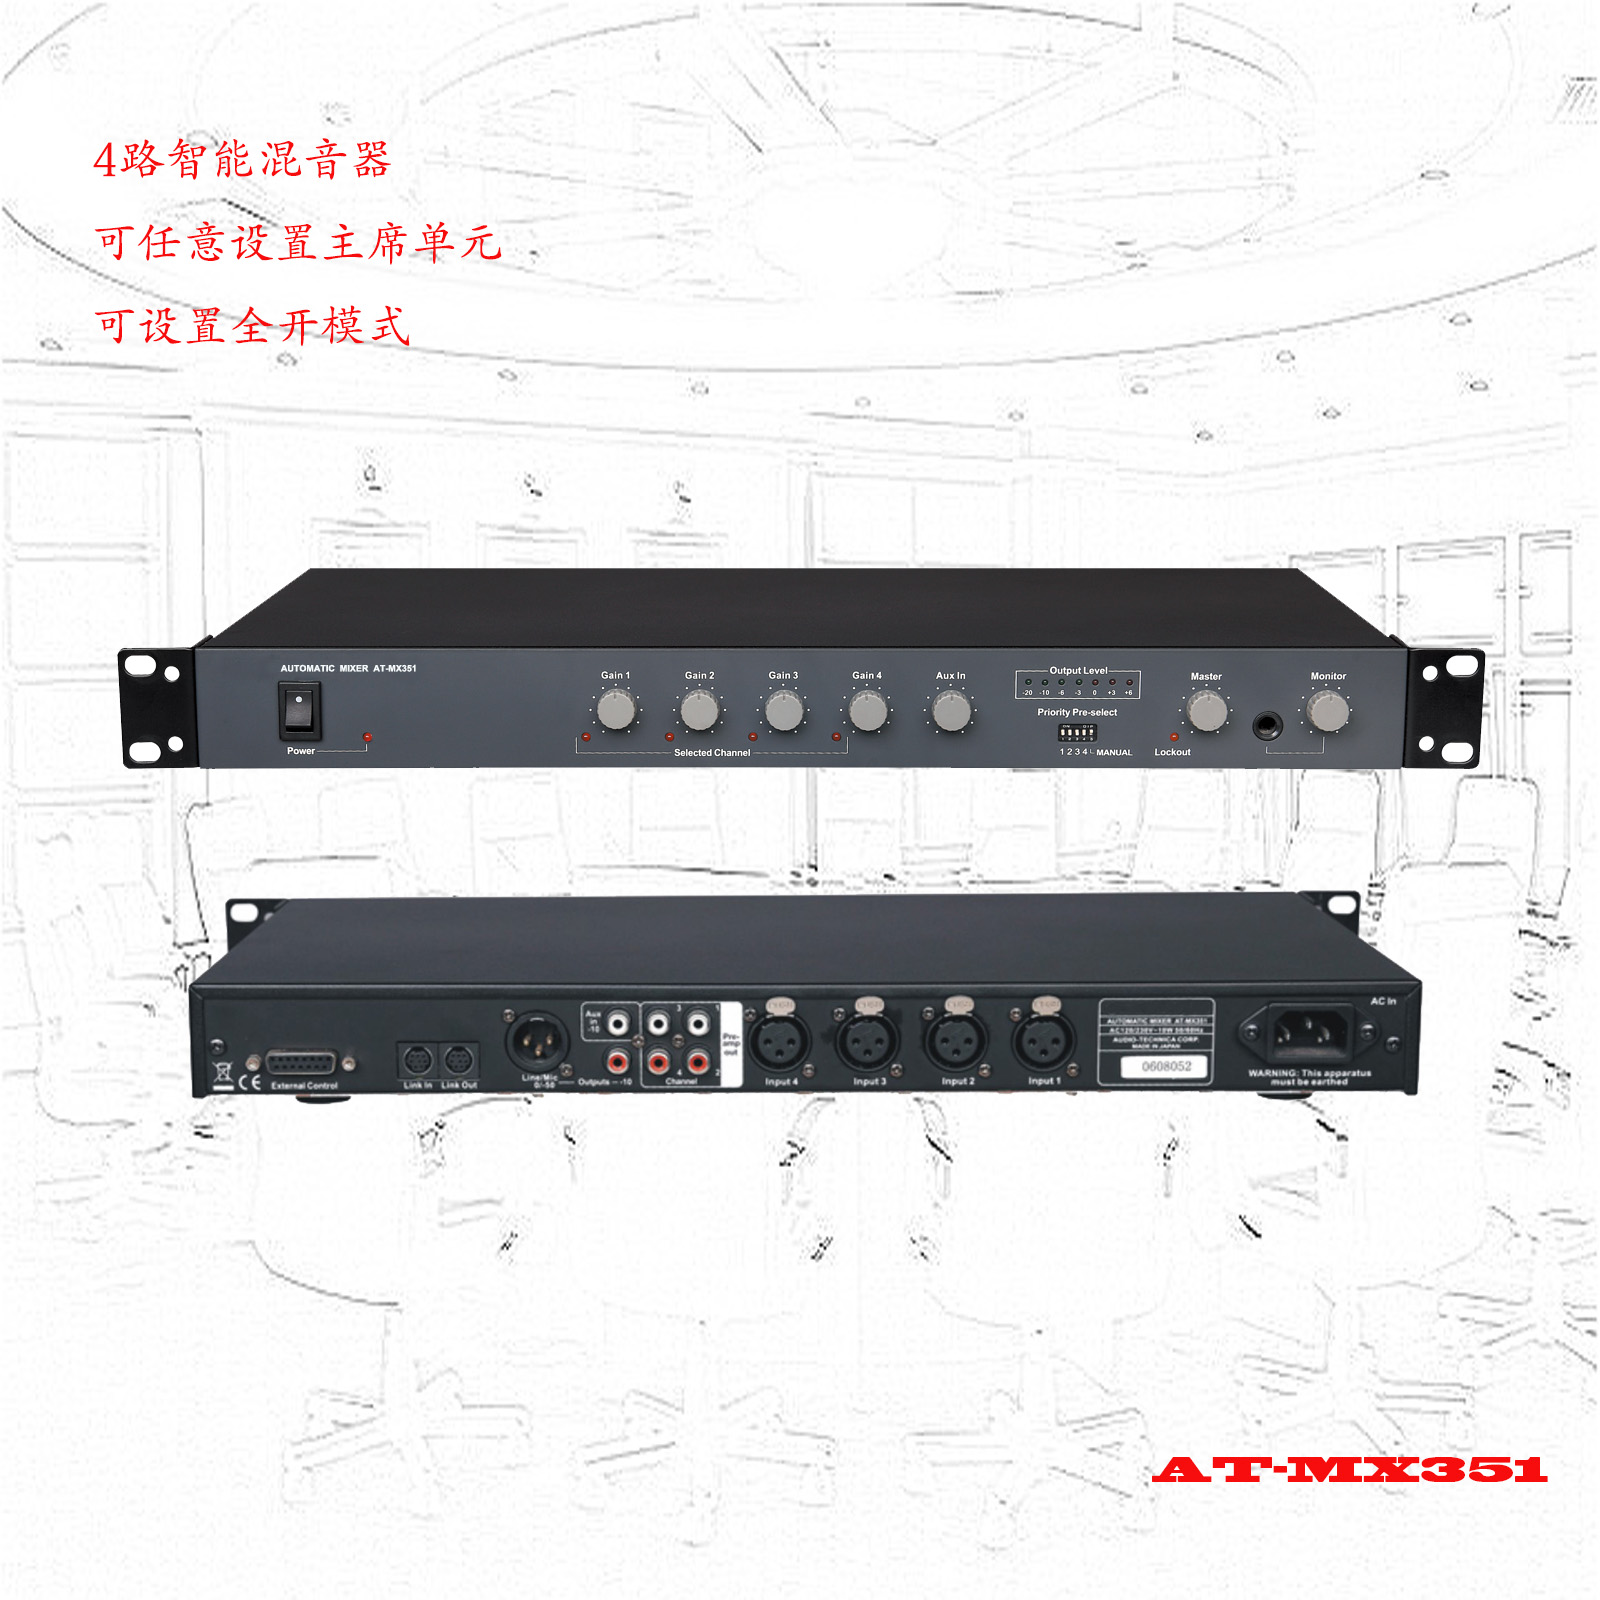 PREAK Intelligent Conference AT-MX351 Four Channel Intelligent Reverberator Conference System Engineering Conference Reverberator